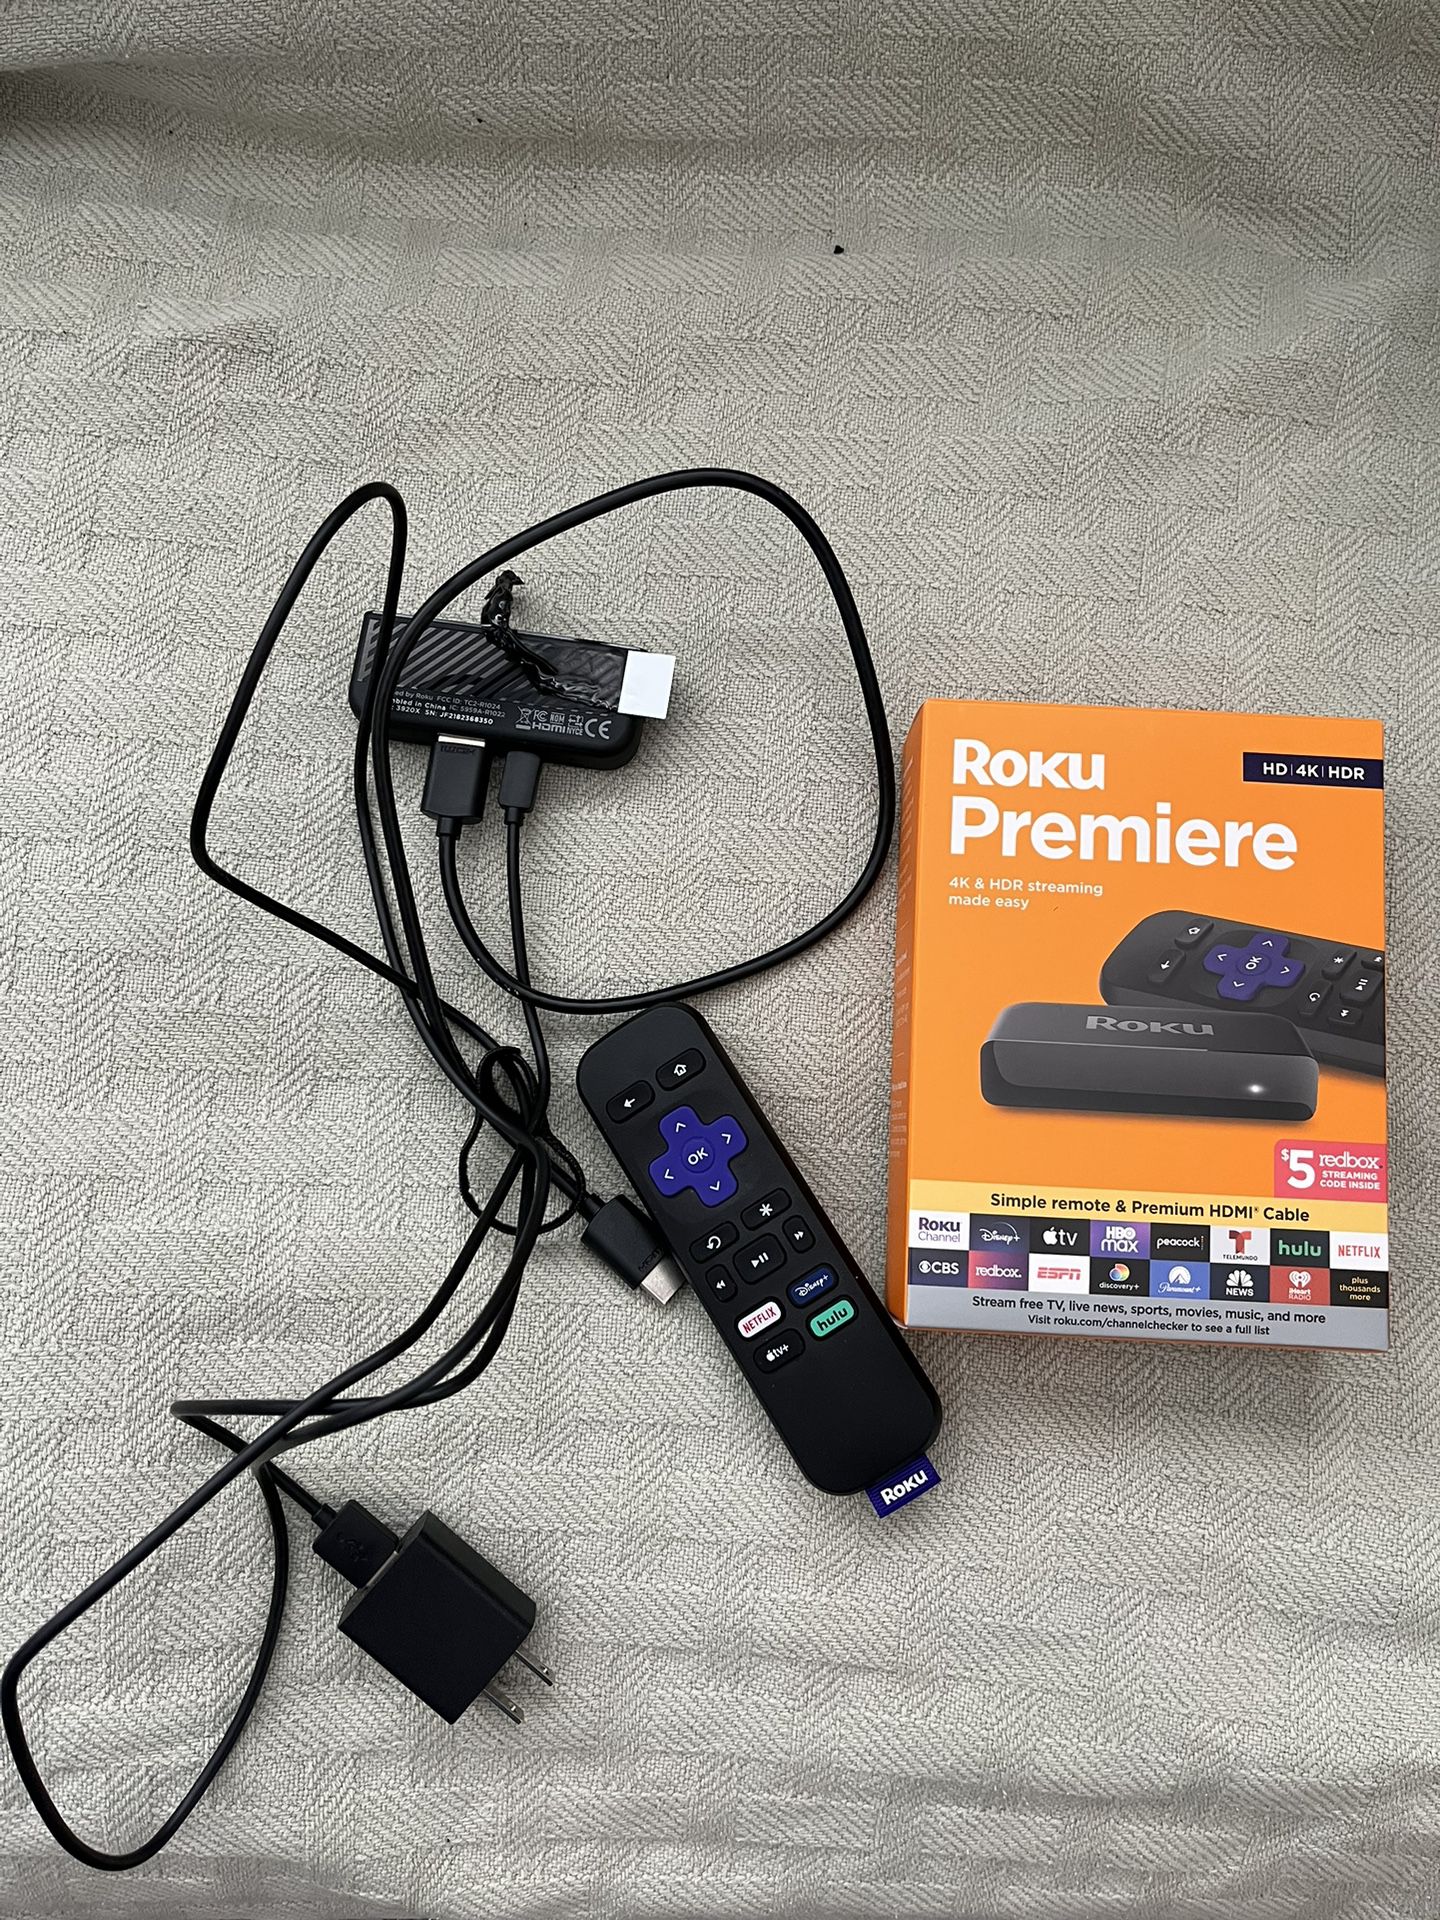 Tired Of Paying Cable? Or U Can Only Watch 5 Channels  On Antenna? Roku premiere . Will Deliver